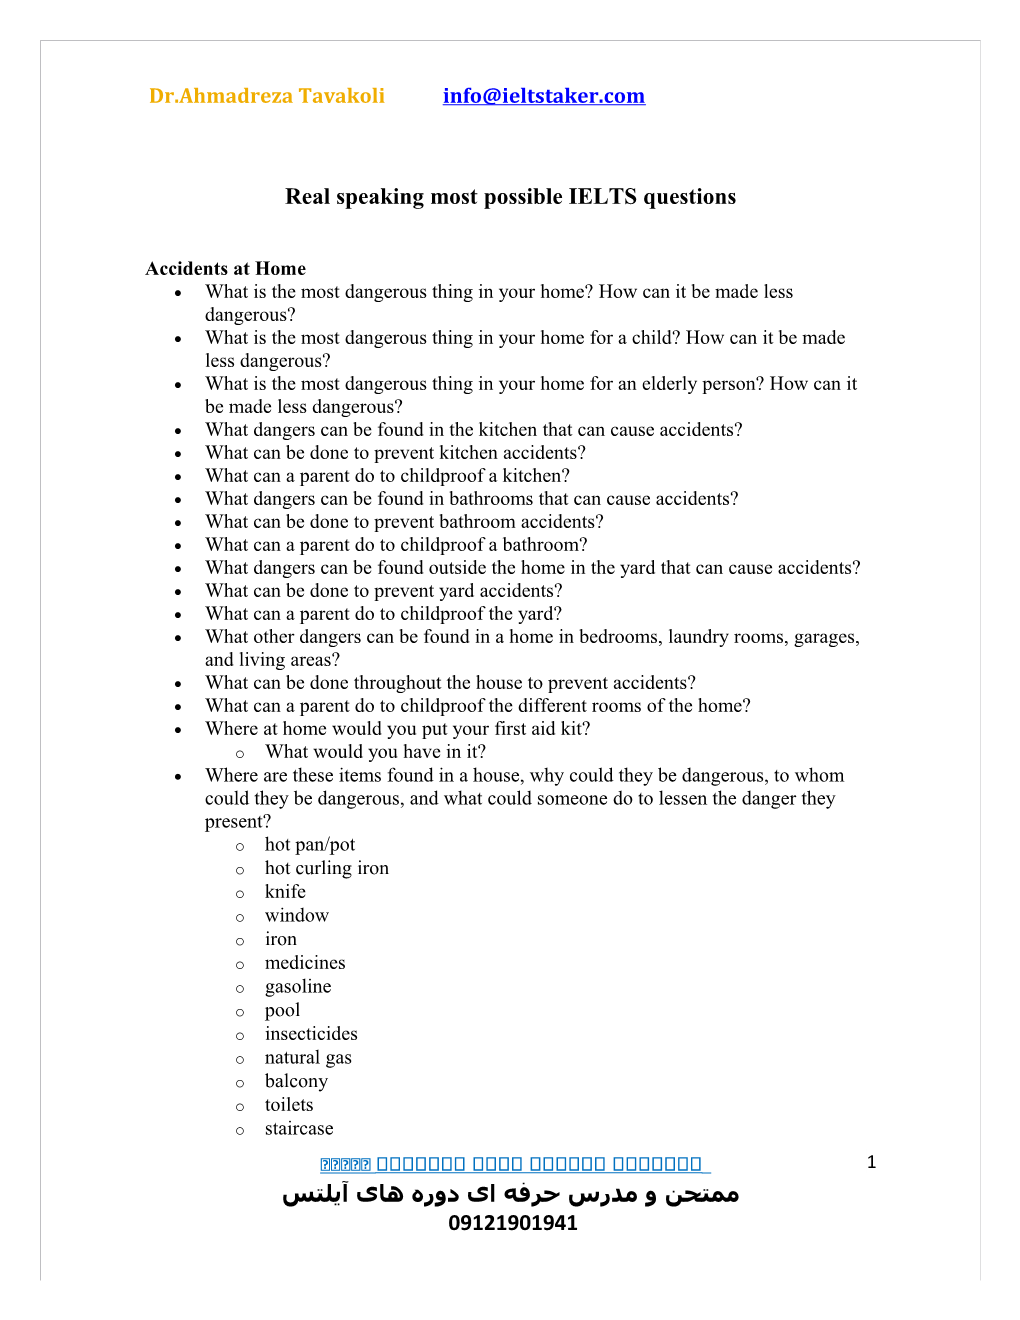 Real Speaking Most Possible IELTS Questions